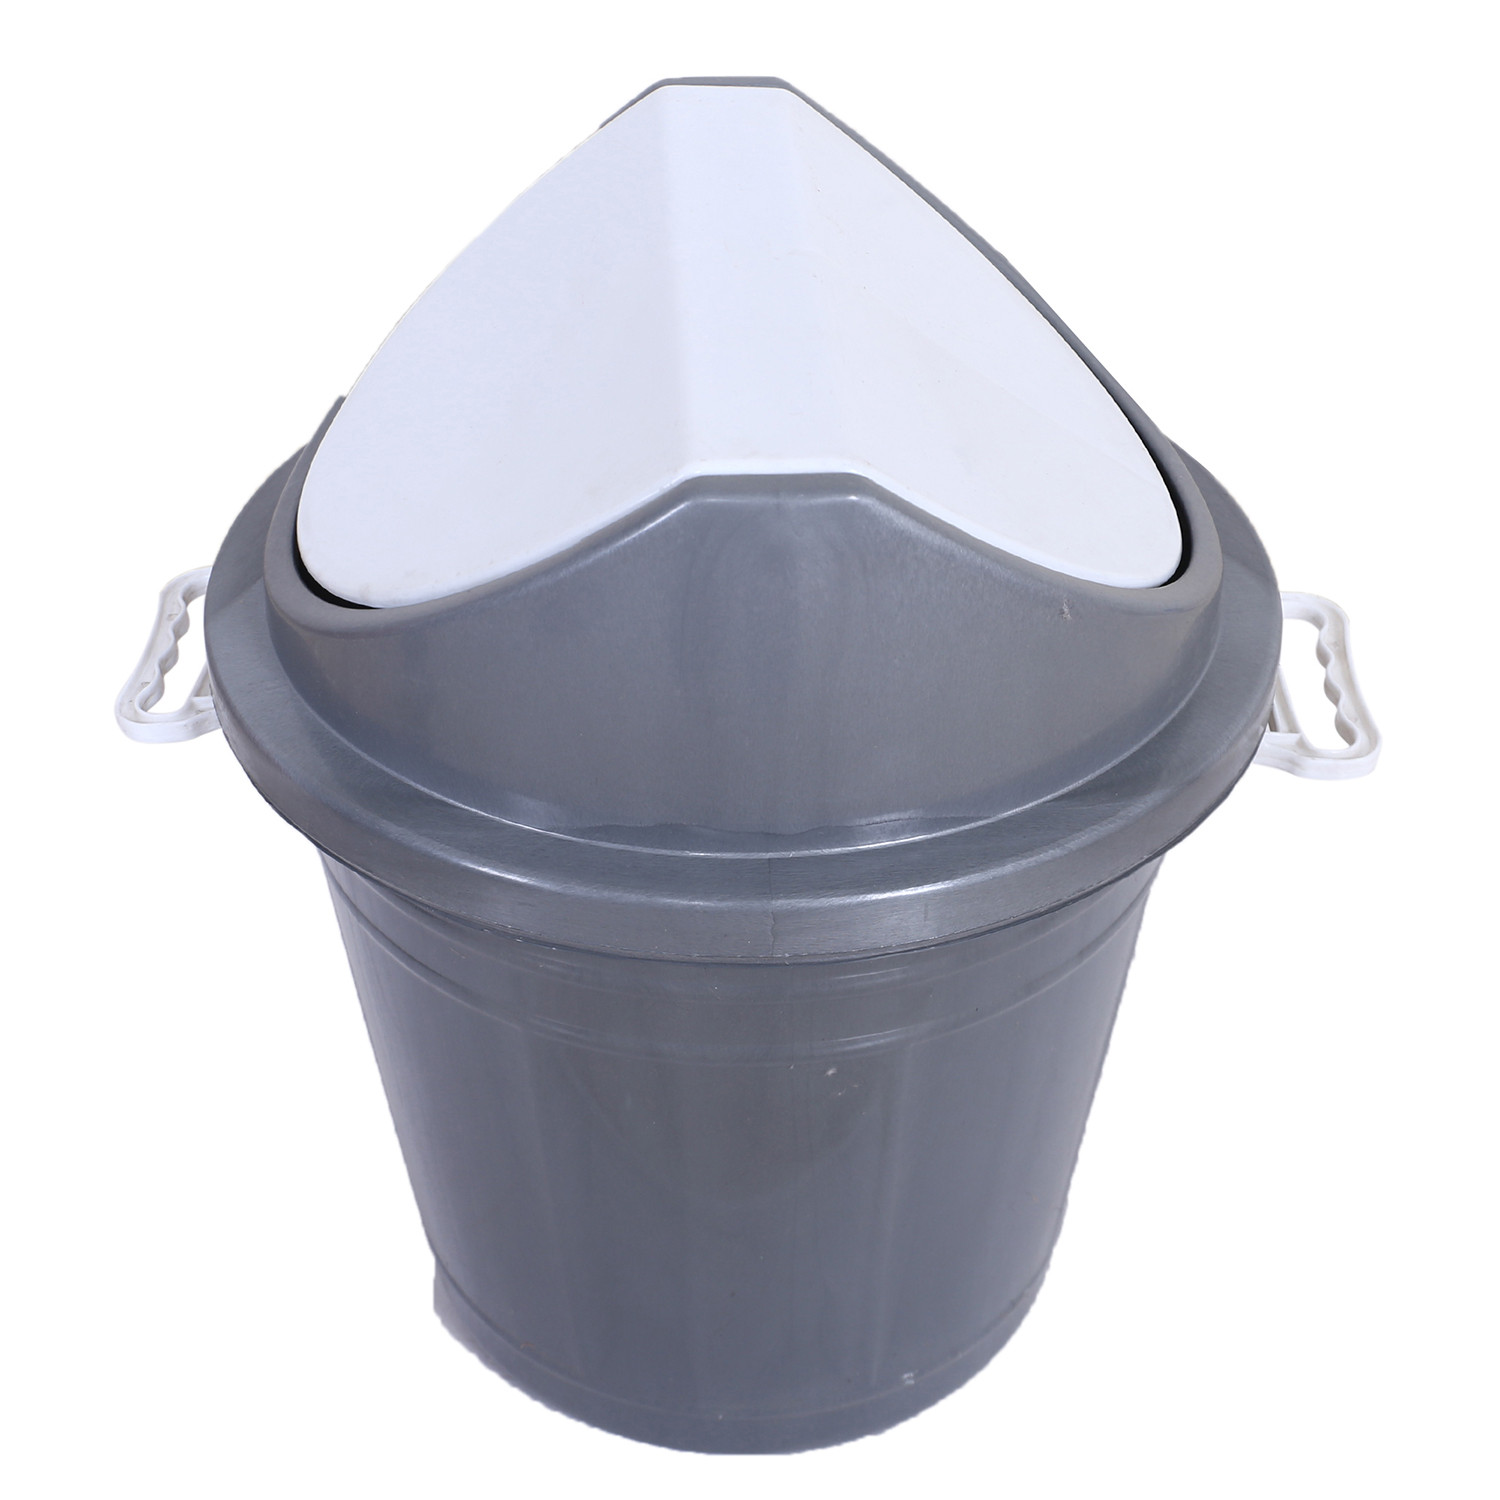 Kuber Industries Swing Top Lid Dustbin|Plastic Garbage Basket & Round Trash Can|Waste Bin with Lid For Home,Bathroom,Office,Washrooms,30 Litre (Gray)